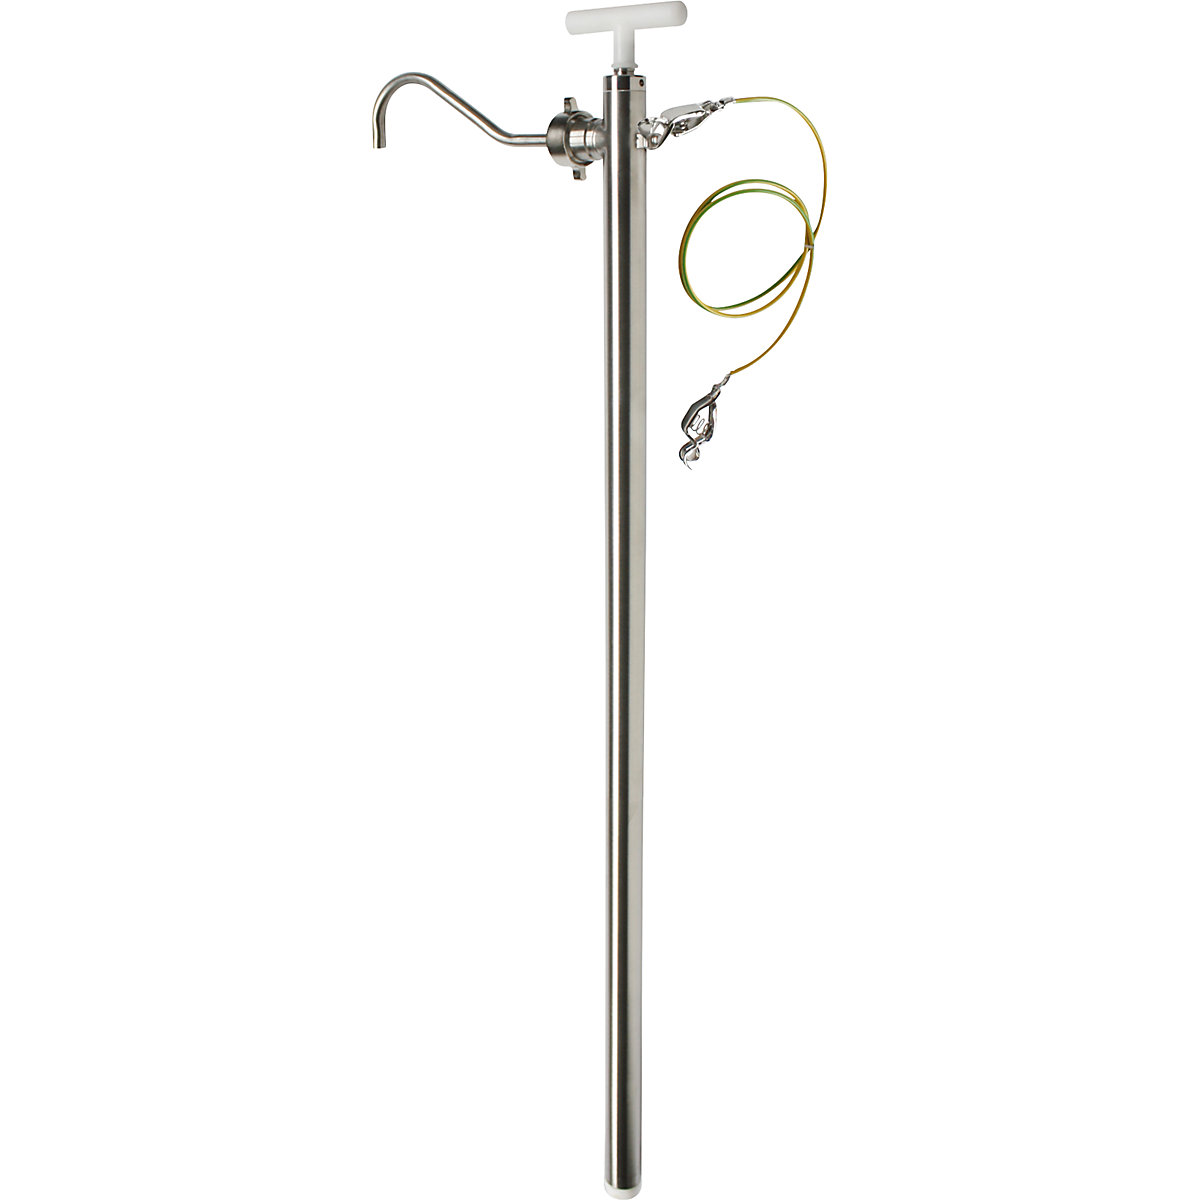 Stainless steel hand pump – Jessberger, for solvents, foodstuffs, 700 mm, 0.3 – 0.6 l/stroke, 2+ items-2